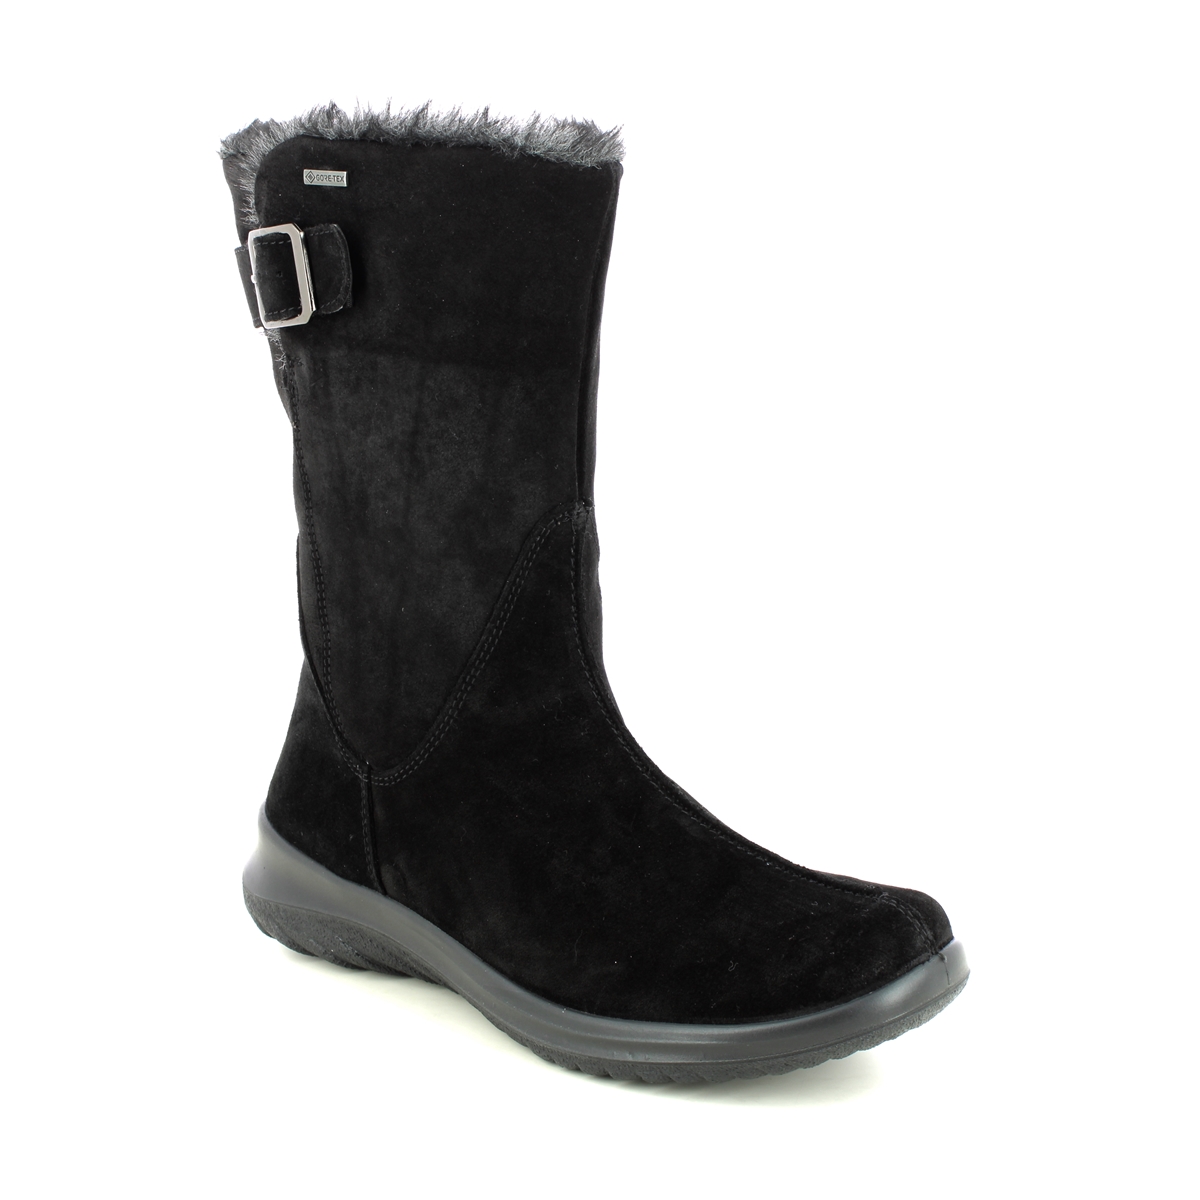 Legero Softboot Gtx Mid Black Suede Womens Mid Calf Boots 2009576-00 In Size 6 In Plain Black Suede